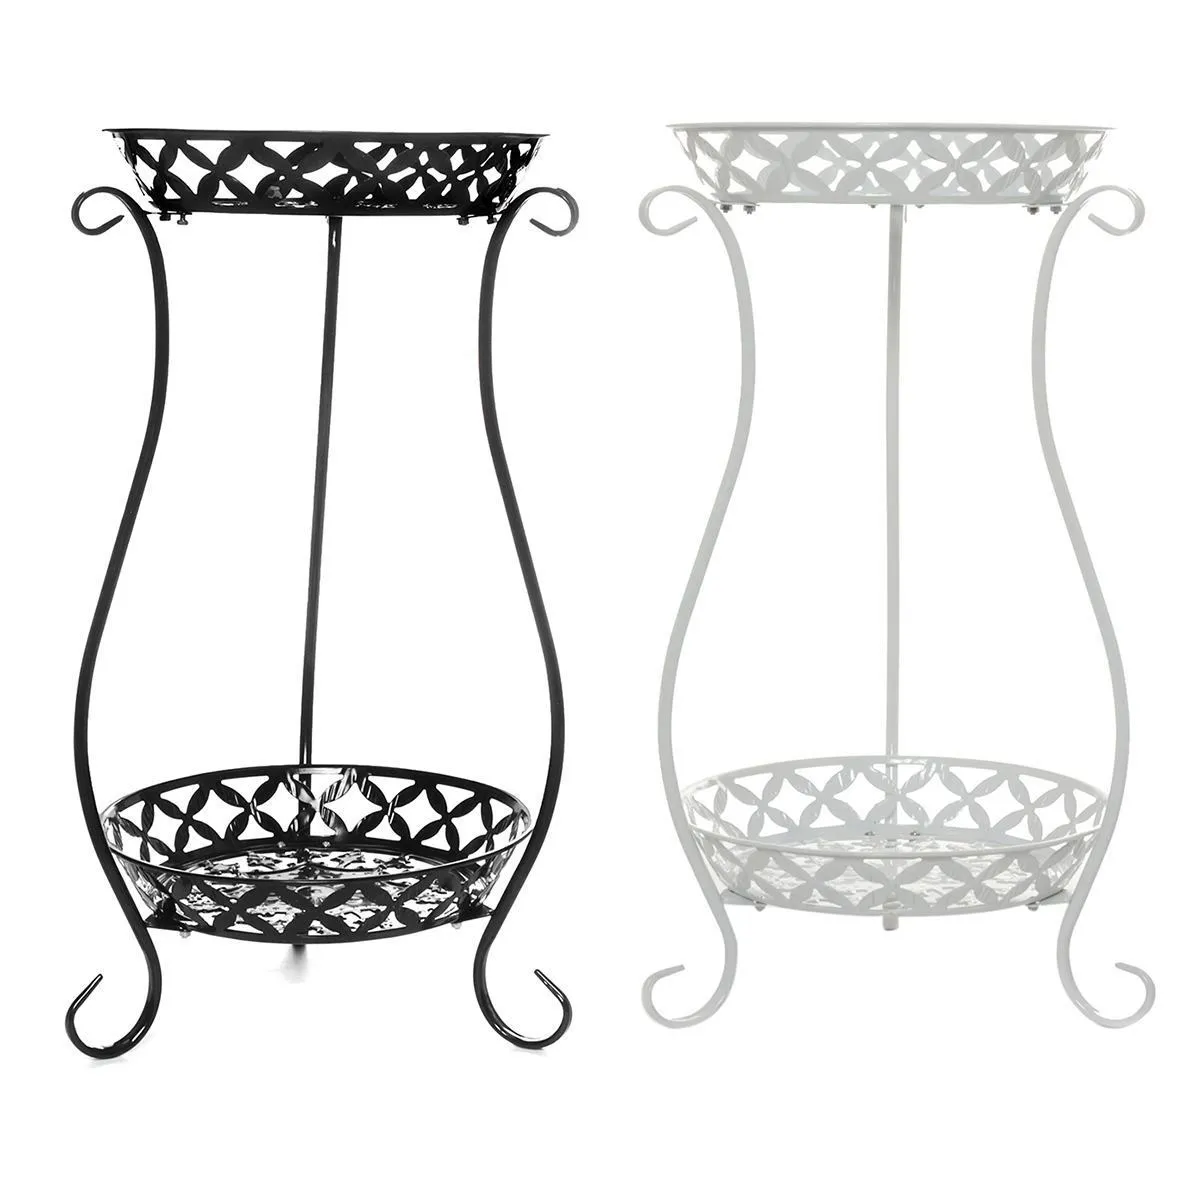 Wrought Iron Double-layer Plant Stand Flower Shelf for Rack Balcony Simple Indoor Living Room Coffee Bar Garden Flower Pot Shelf L334g